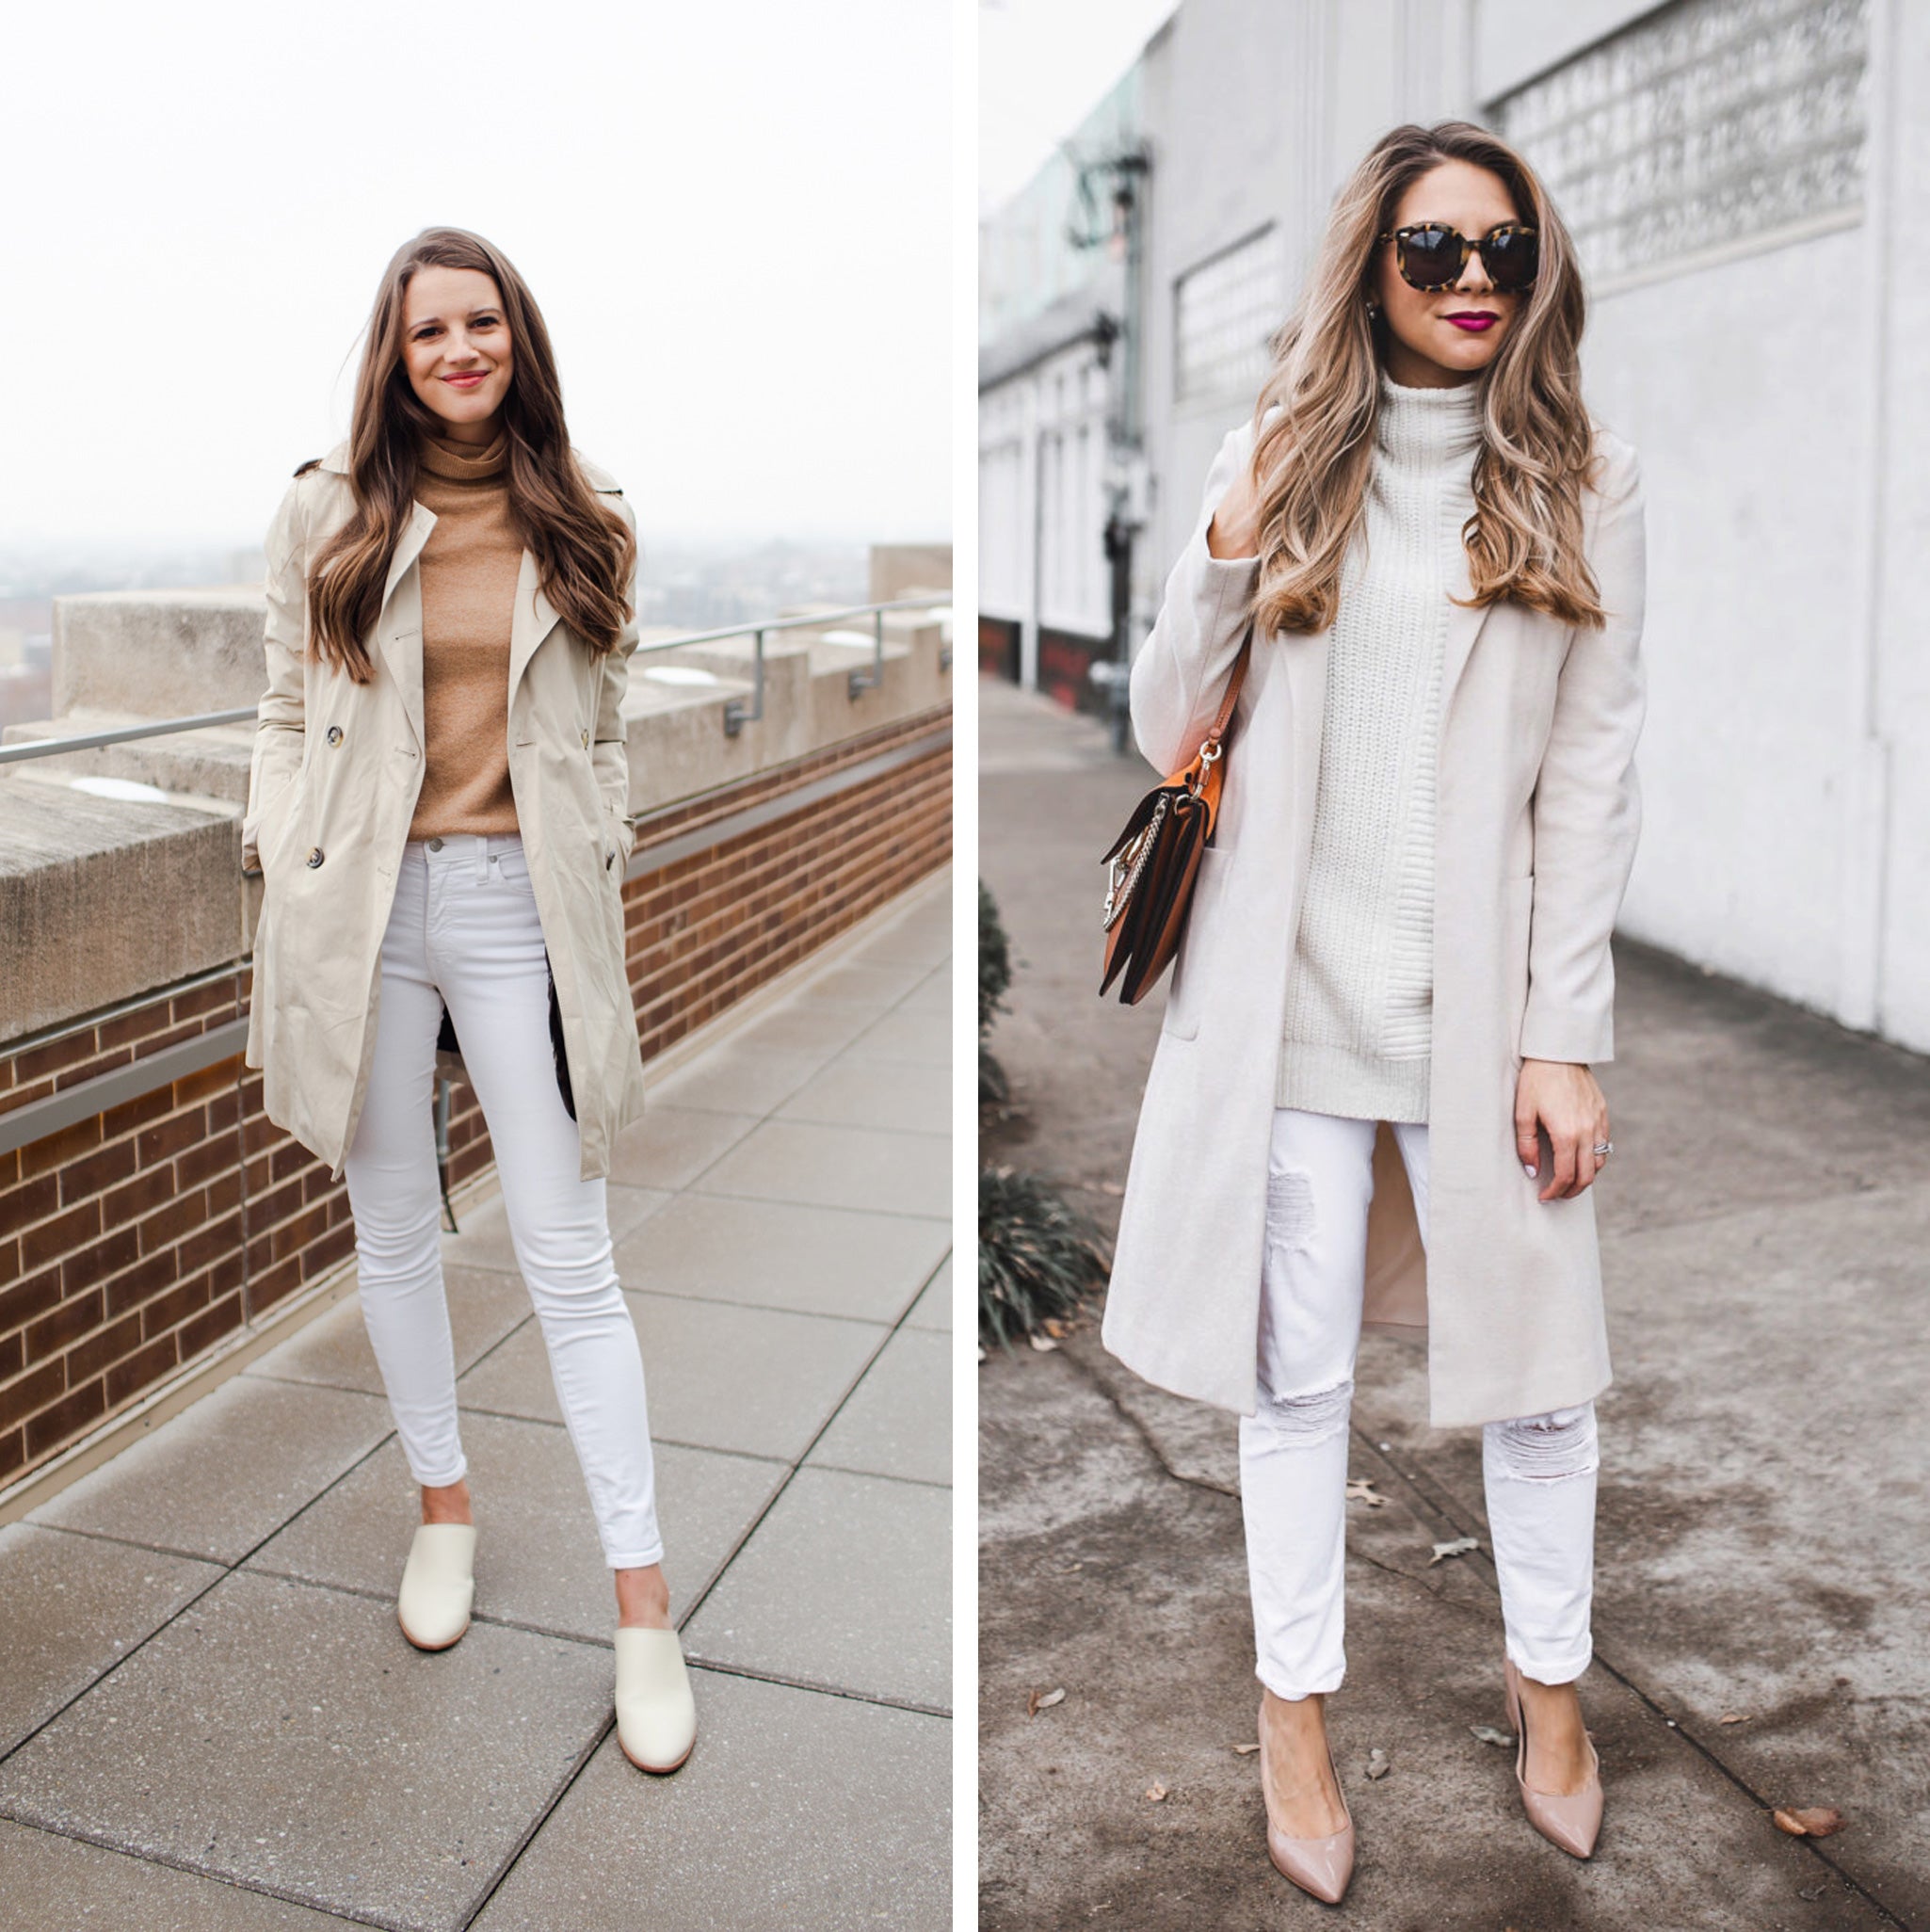 How To: Wear White Jeans in Winter